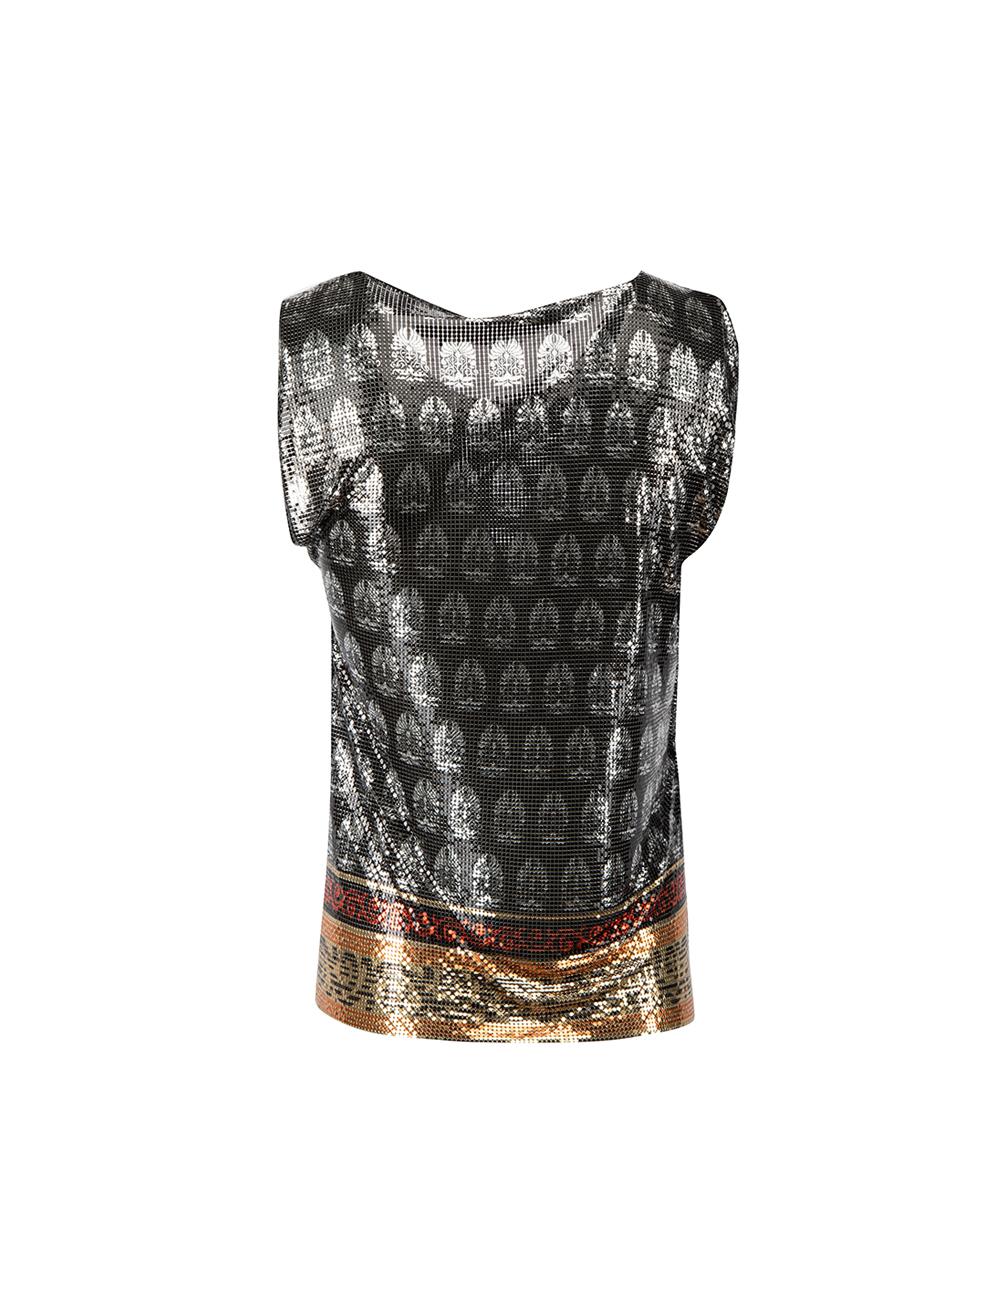 Metallic Patterned Chainmail Top Size S In New Condition For Sale In London, GB